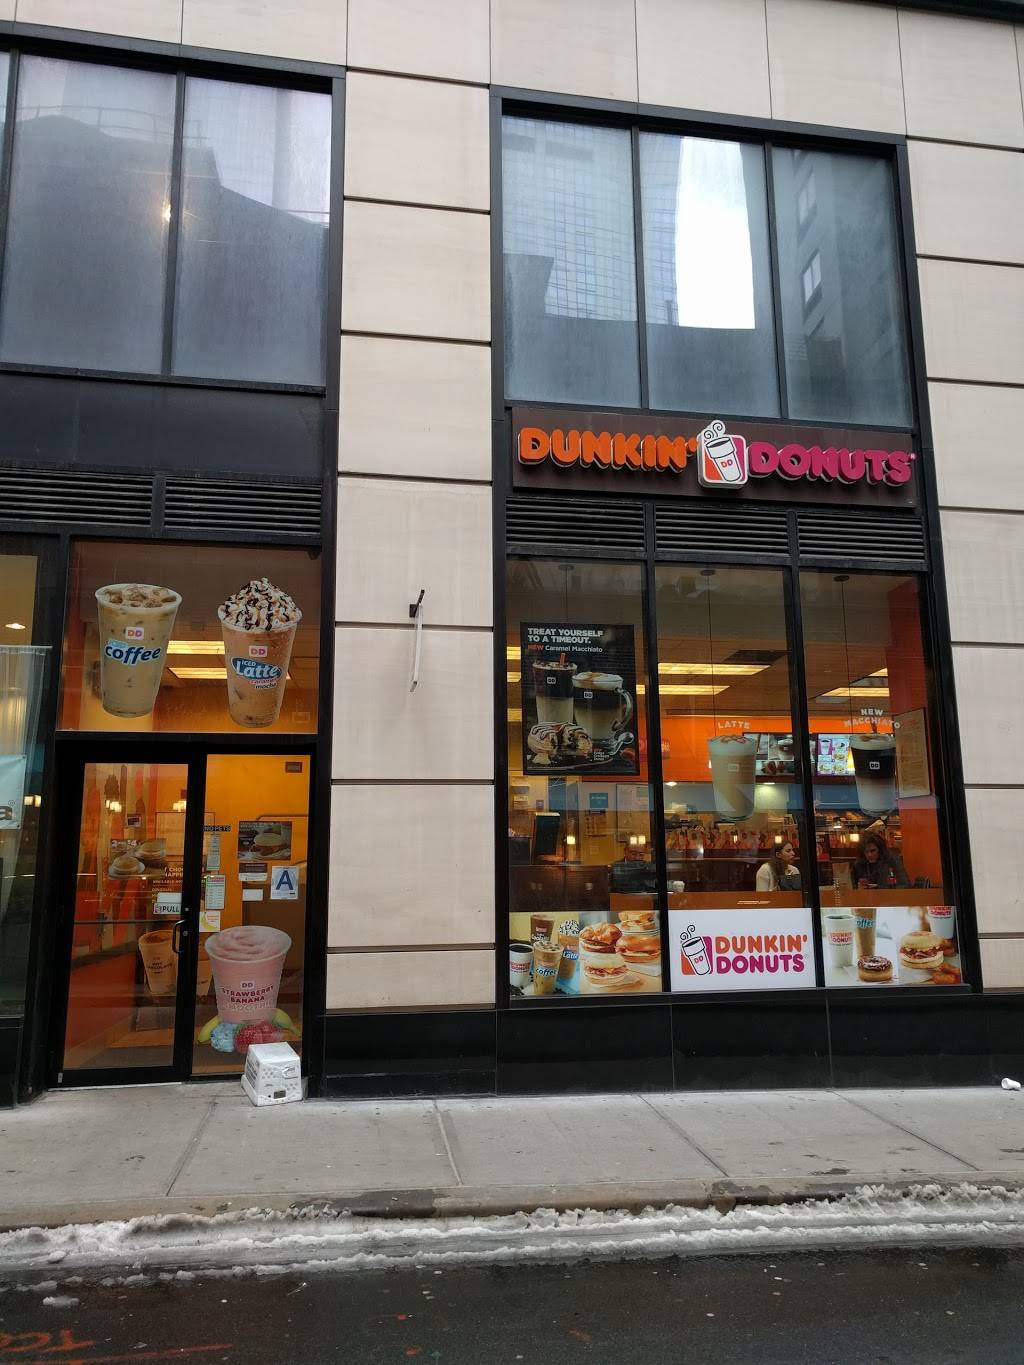 Dunkin Donuts | cafe | 19 Rector St, New York, NY 10006, USA | 2127858111 OR +1 212-785-8111